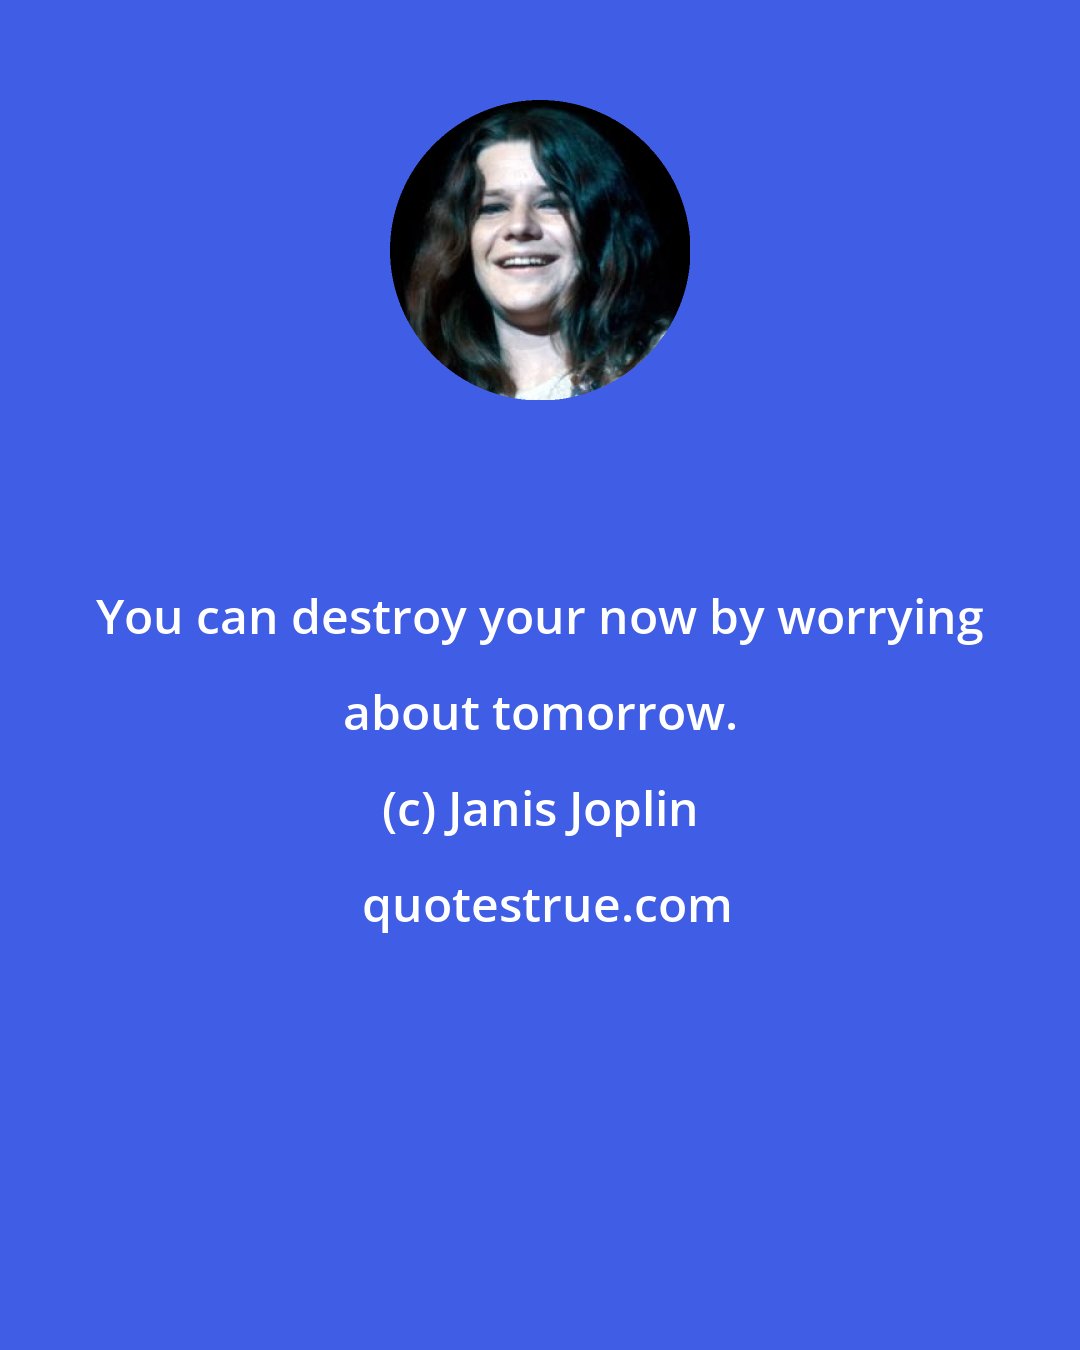 Janis Joplin: You can destroy your now by worrying about tomorrow.